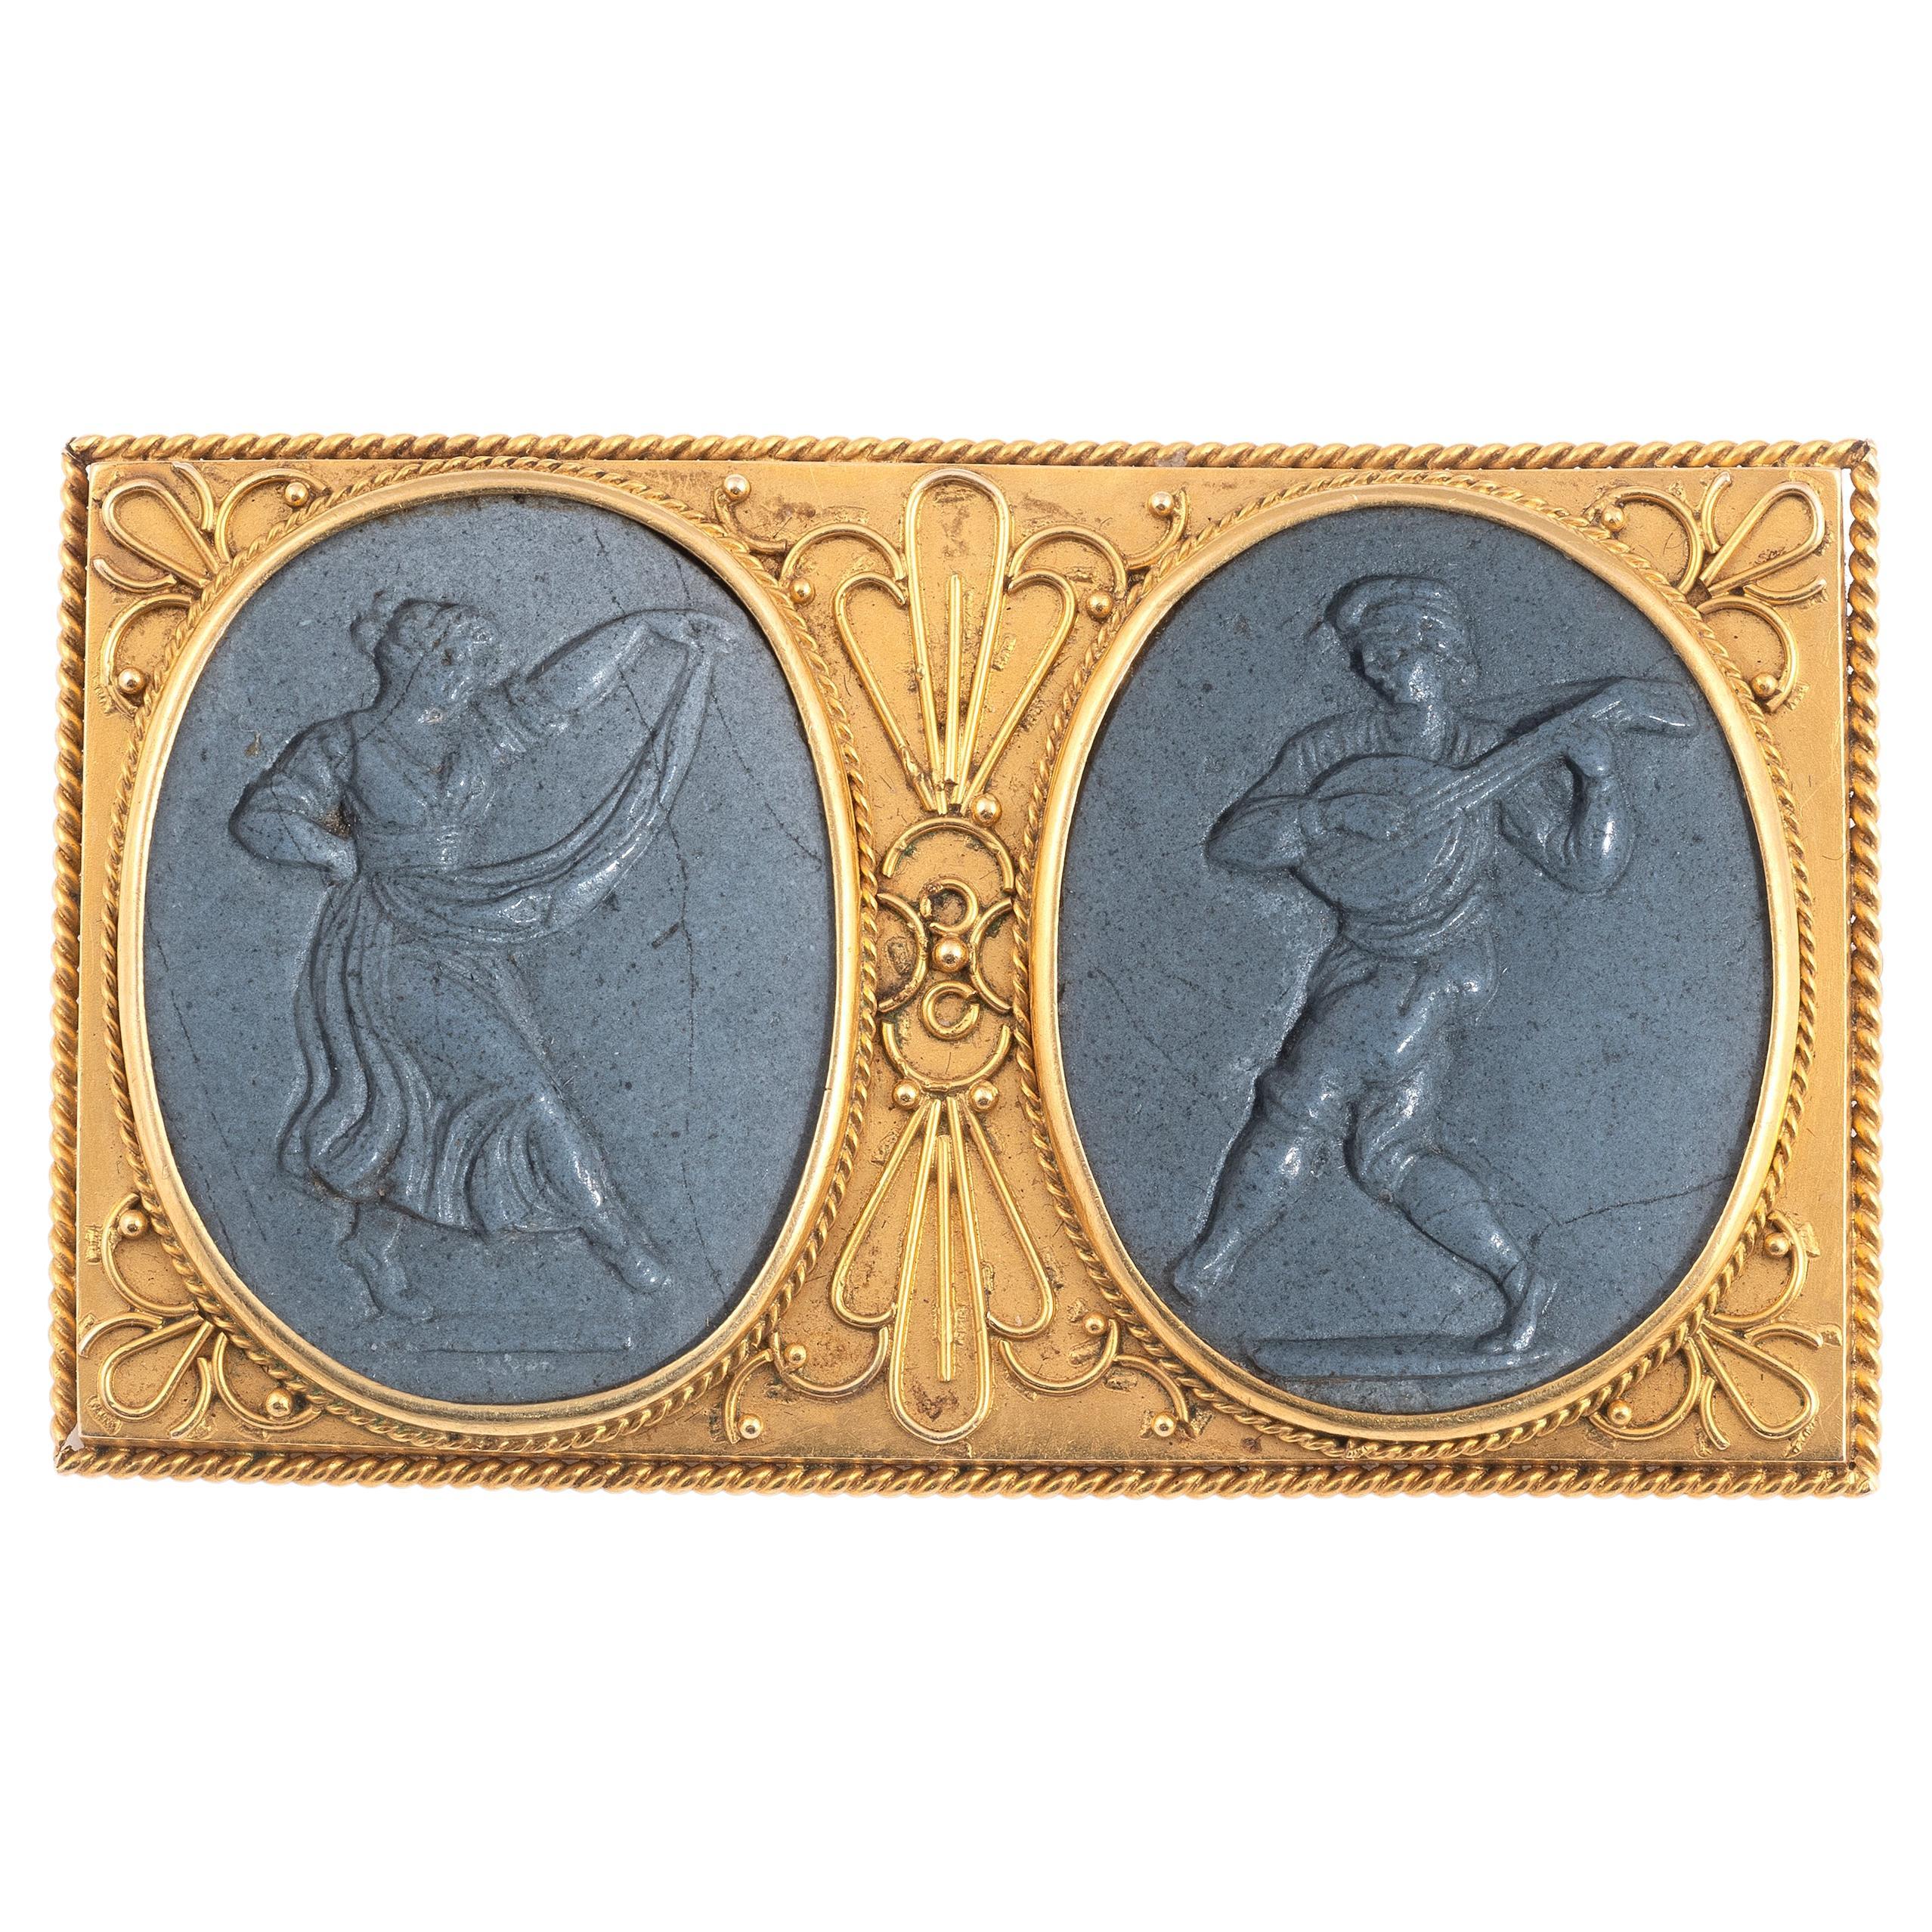 Archaeological Revival Gold And Lava Cameo Brooch Late 19th Century